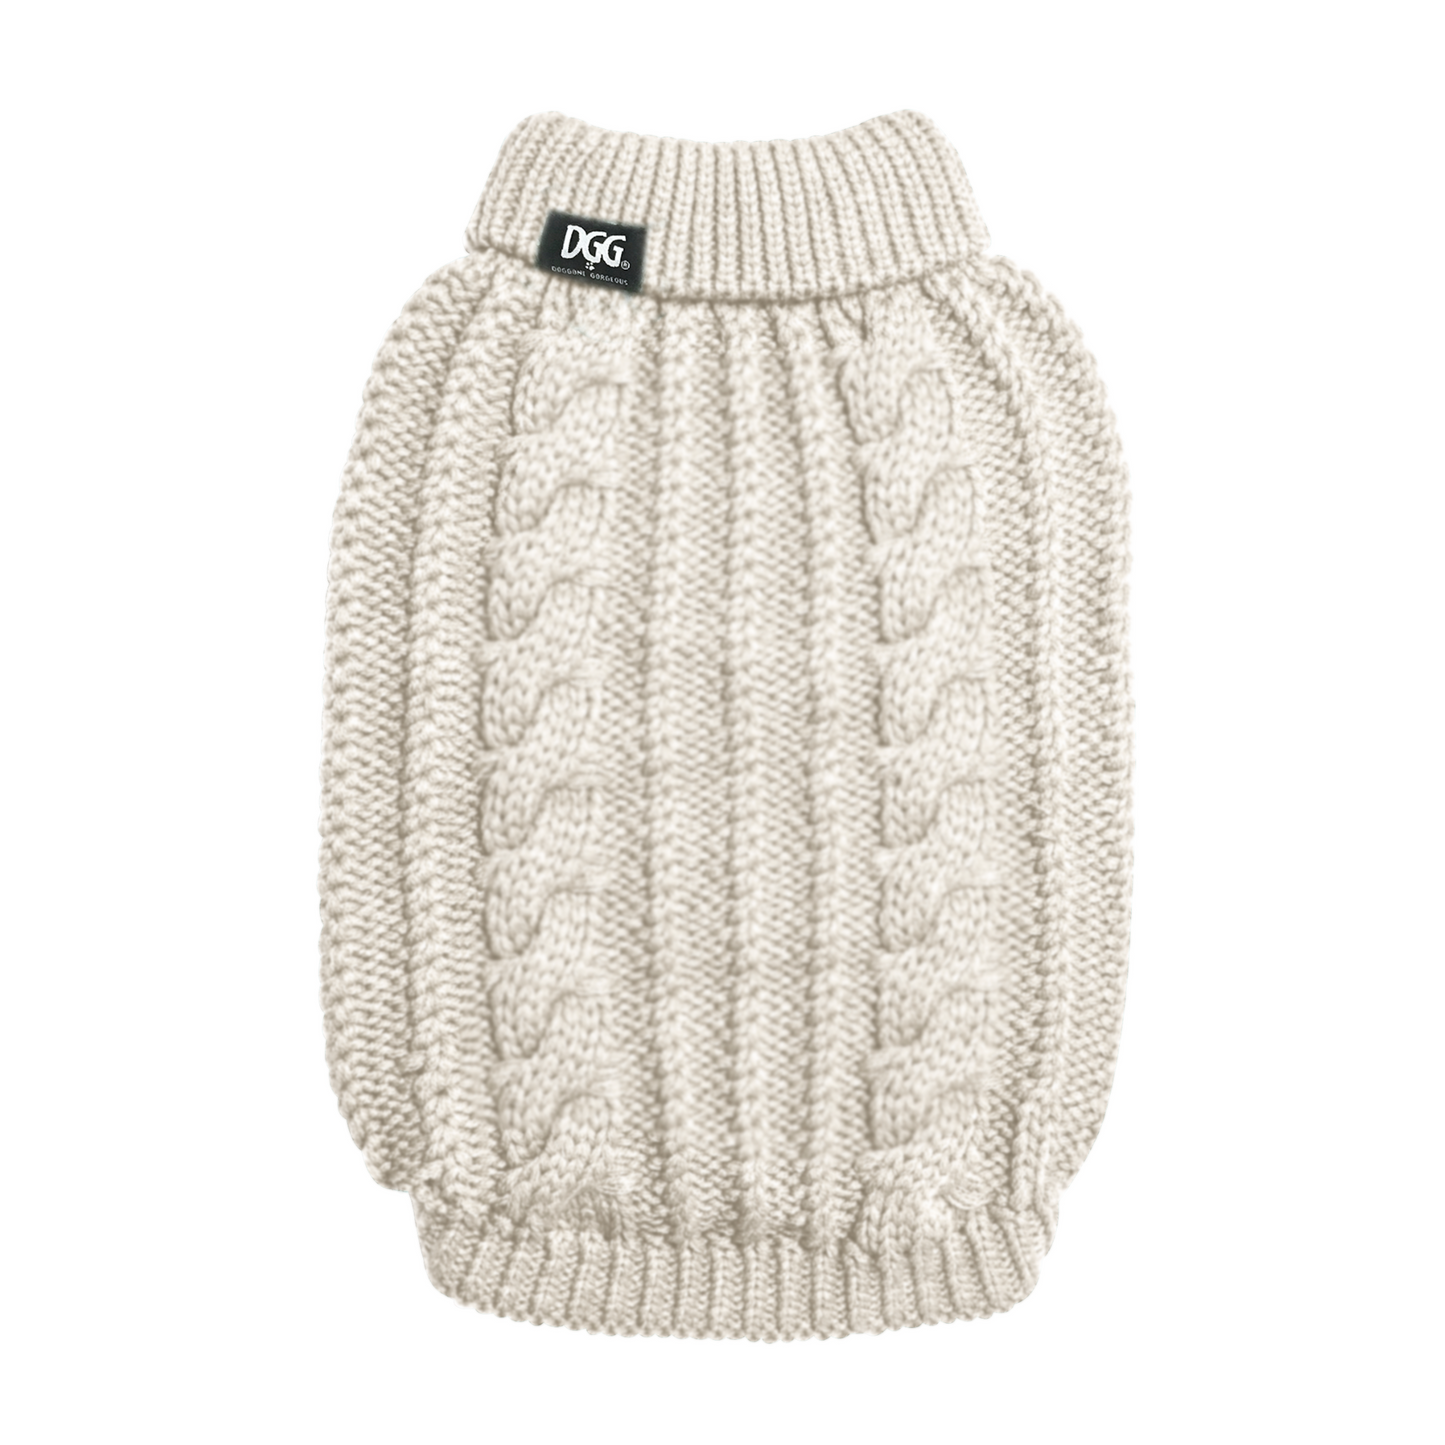 DGG White Fluffy Cable Knitted Dog Jumper